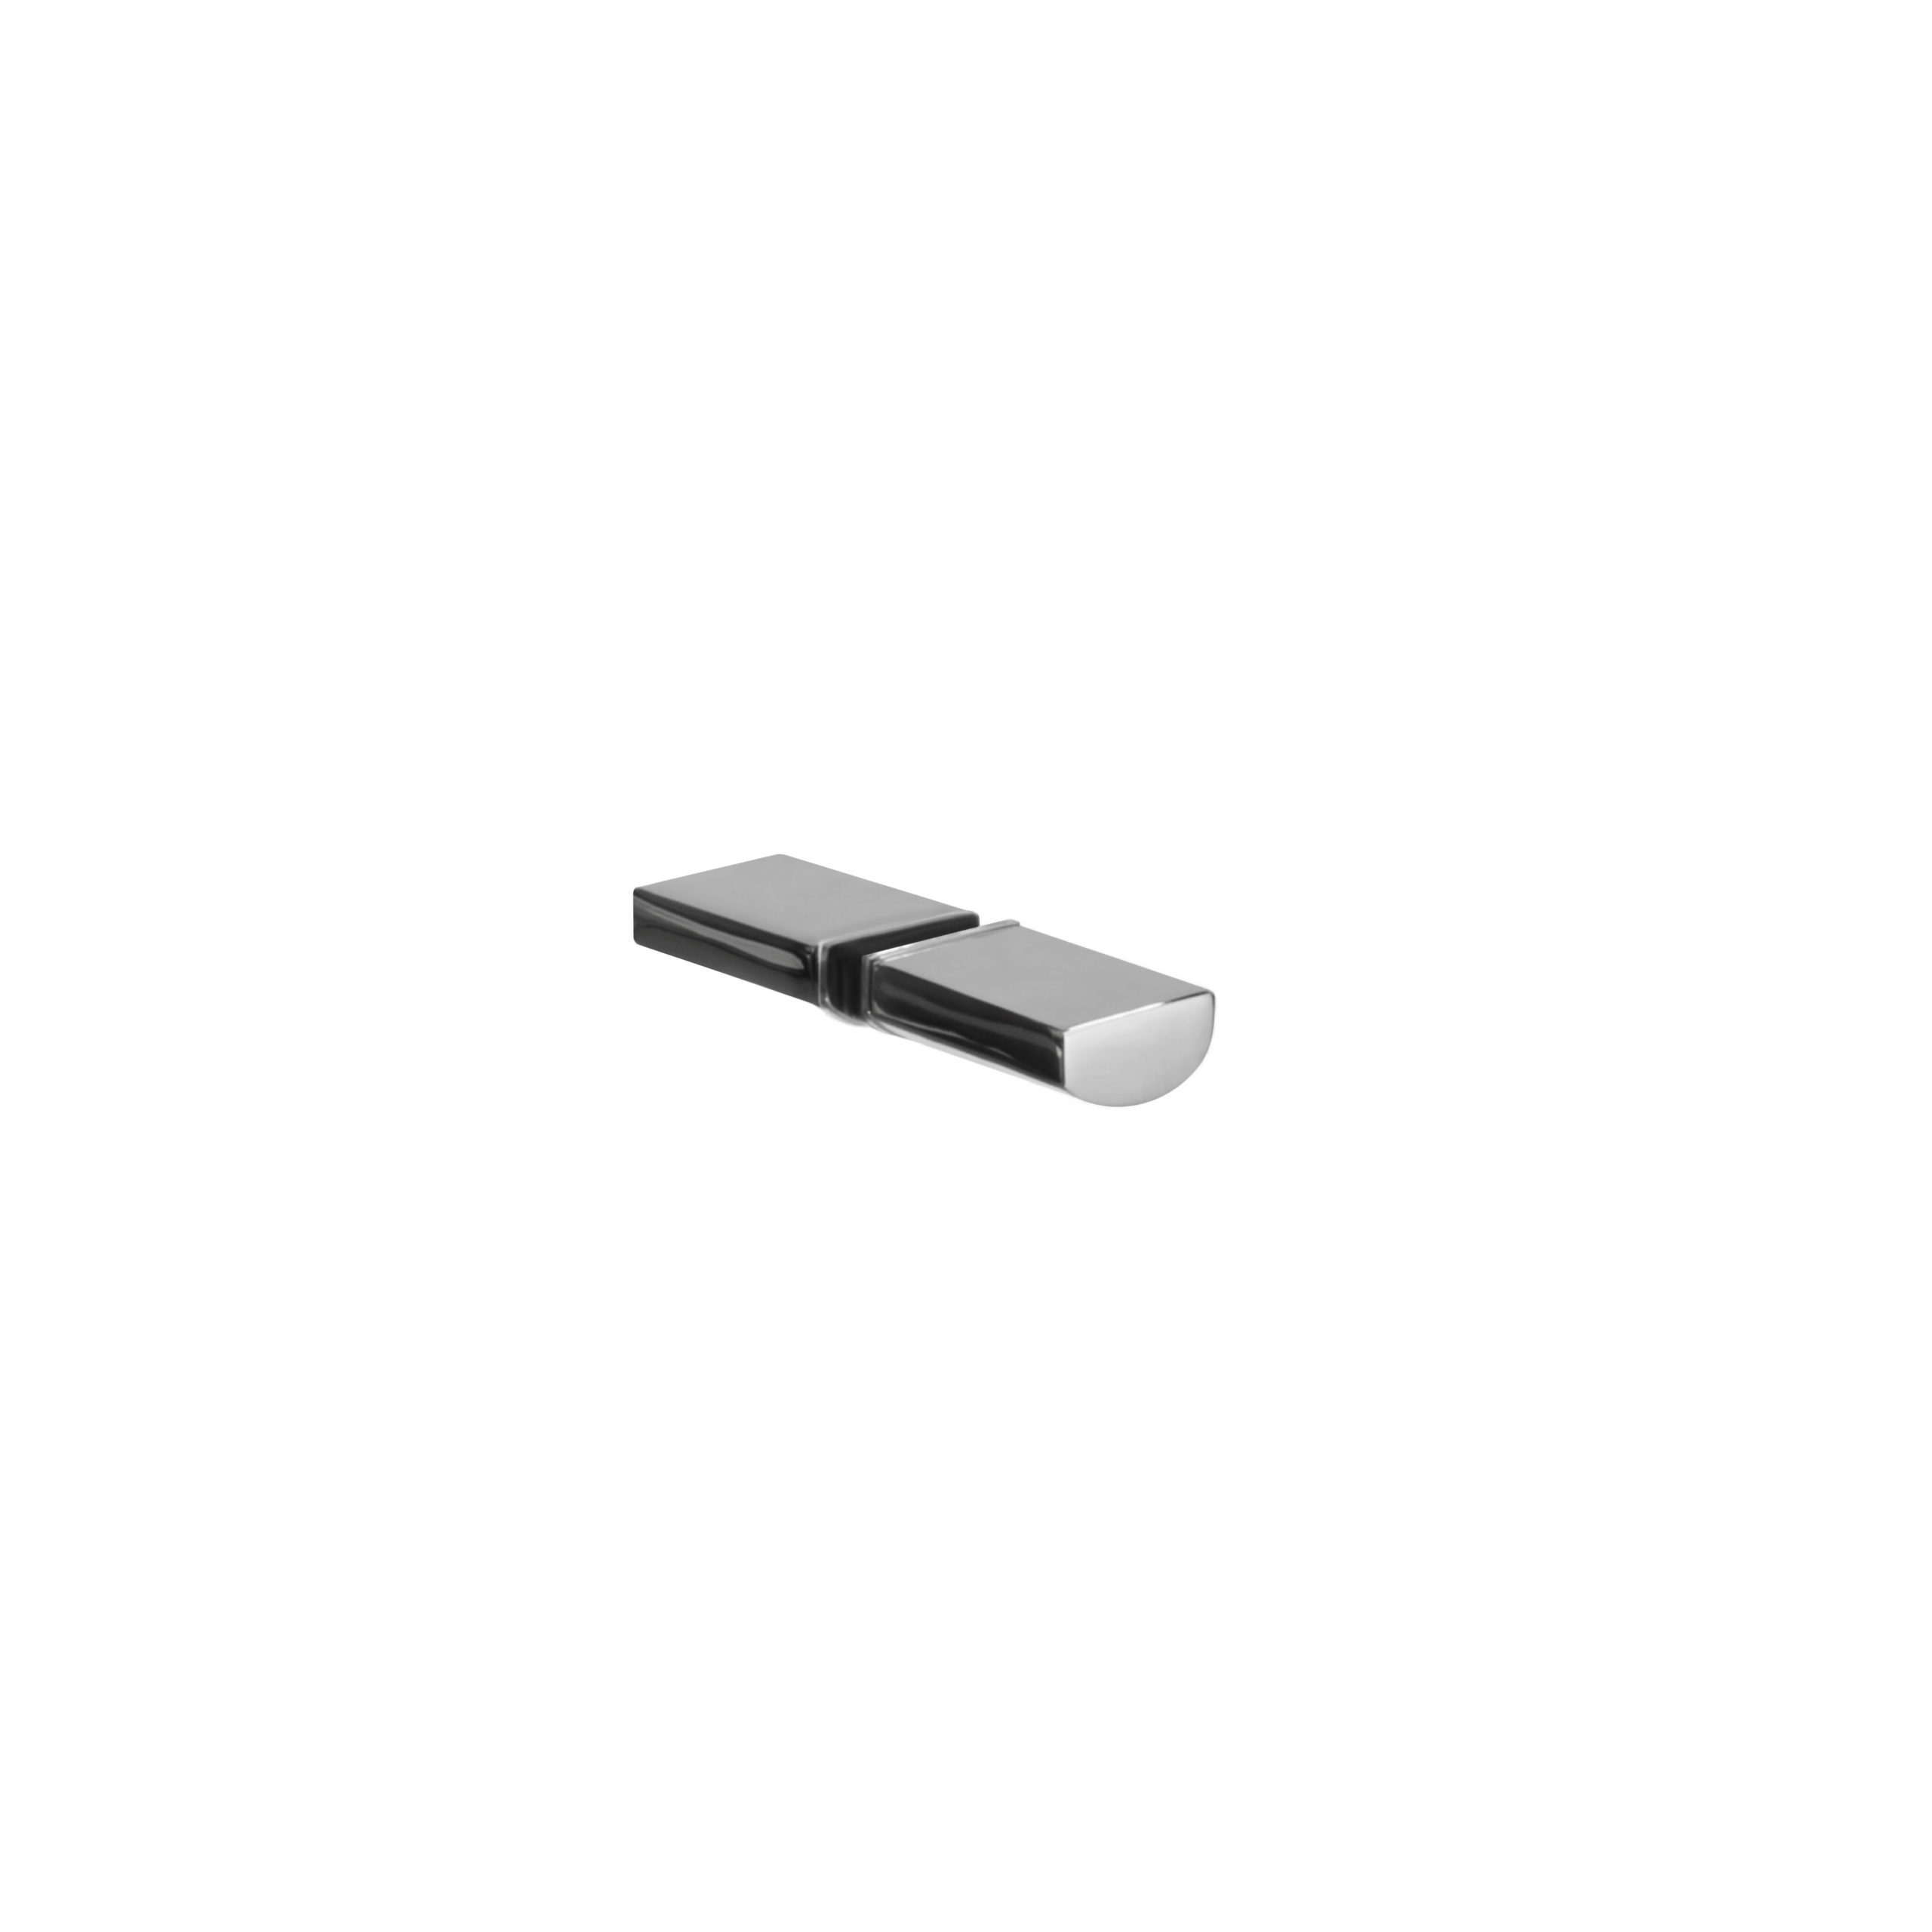 Polished stainless steel modern door pulls - back to back - product SKU PP 801-3 PSS